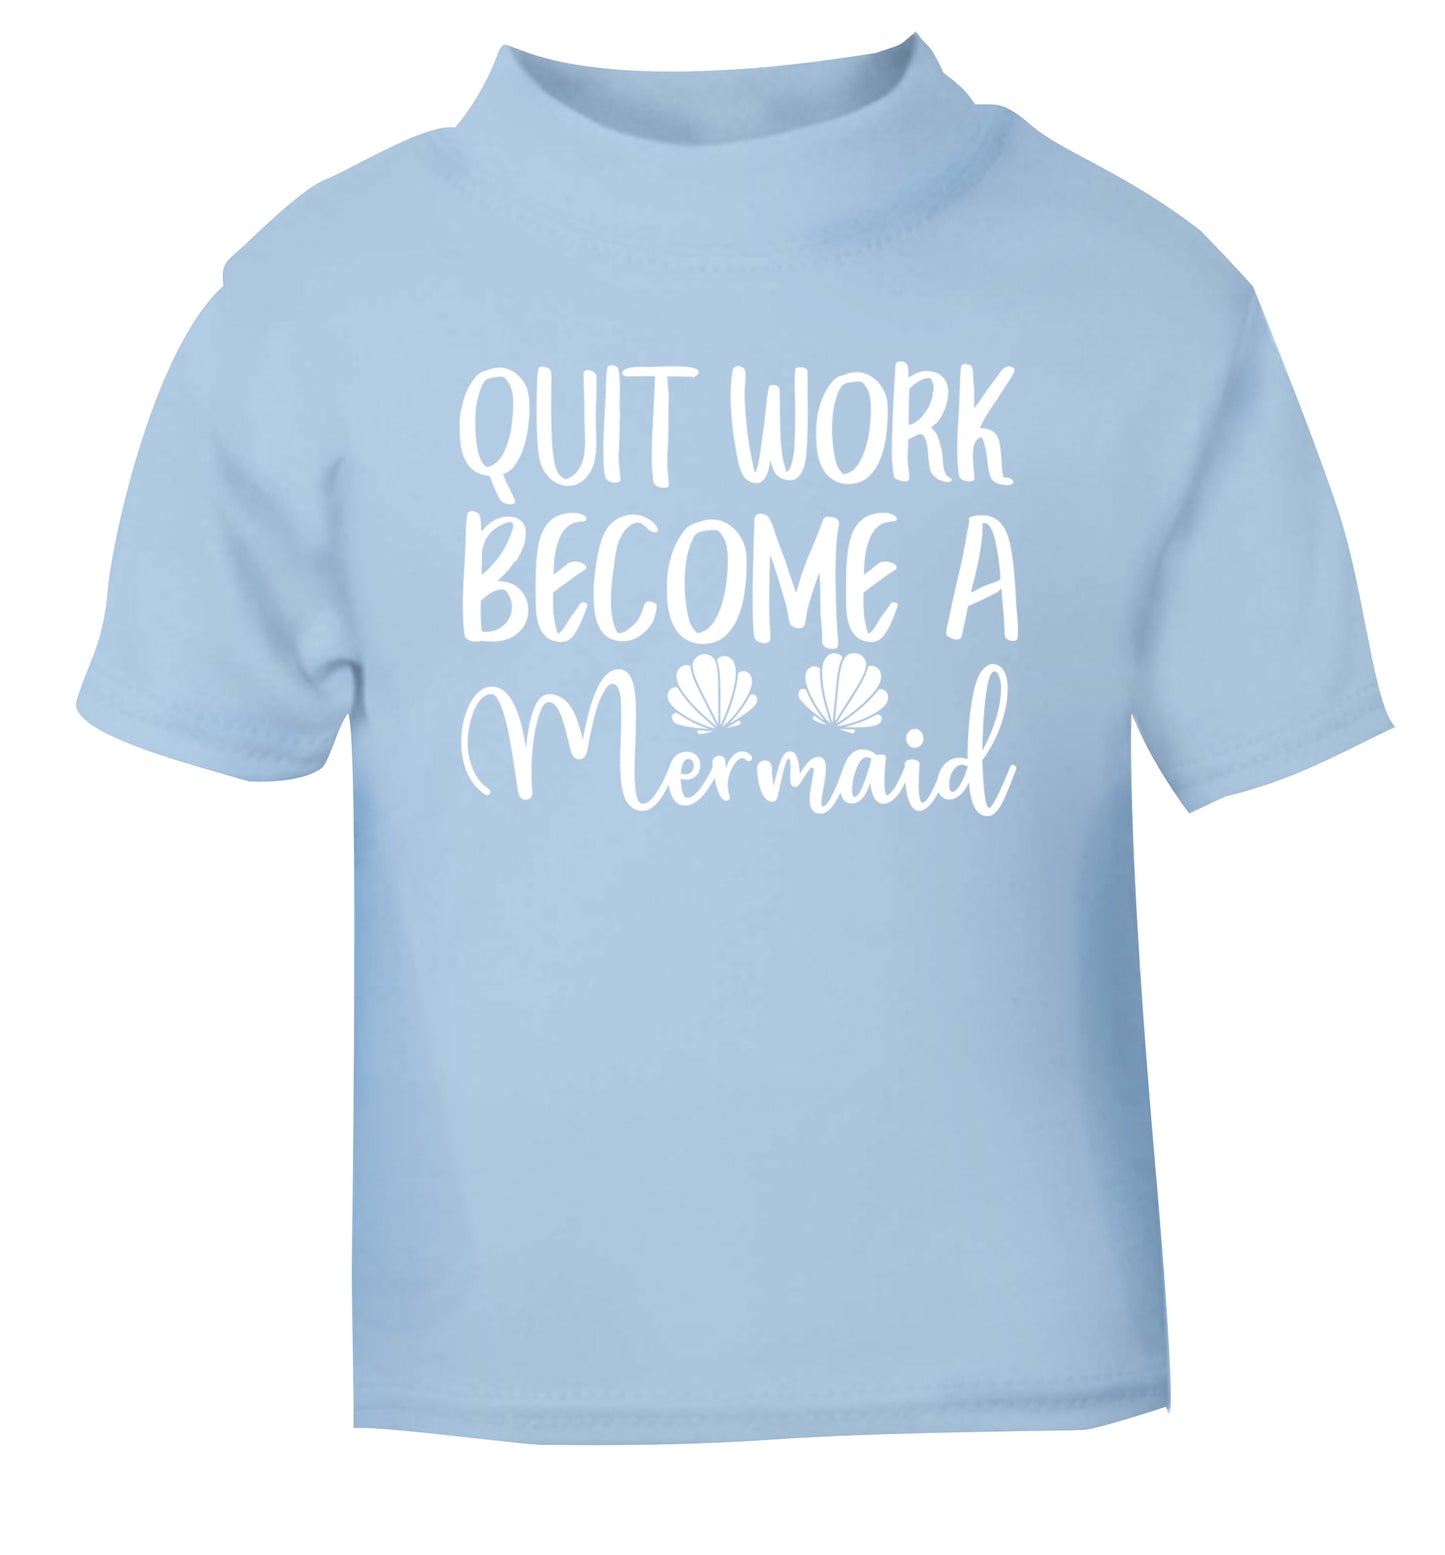 Quit work become a mermaid light blue Baby Toddler Tshirt 2 Years